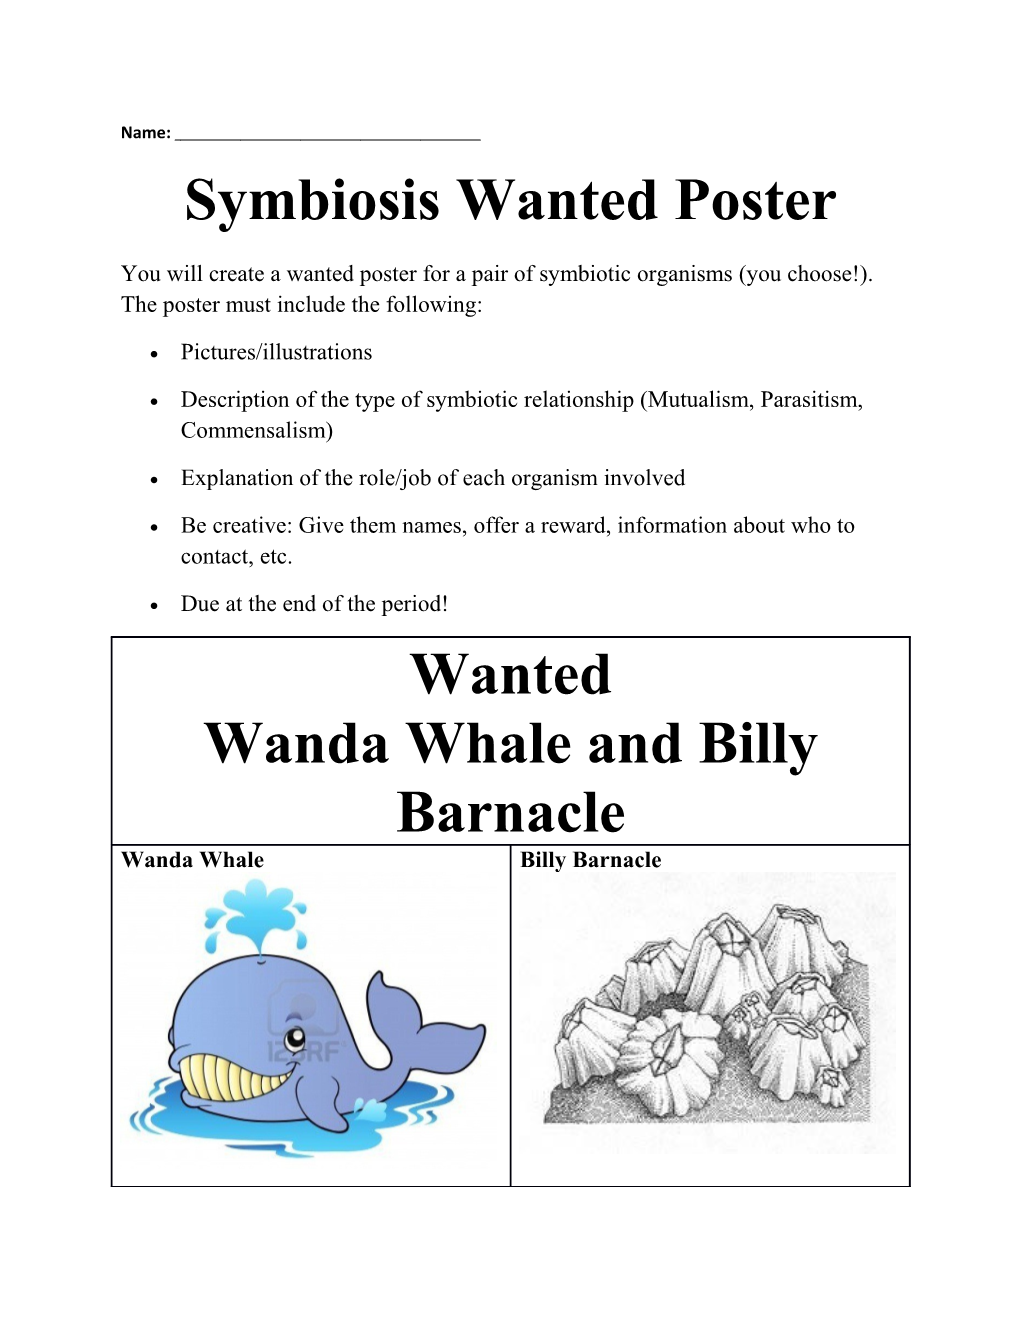 Symbiosis Wanted Poster